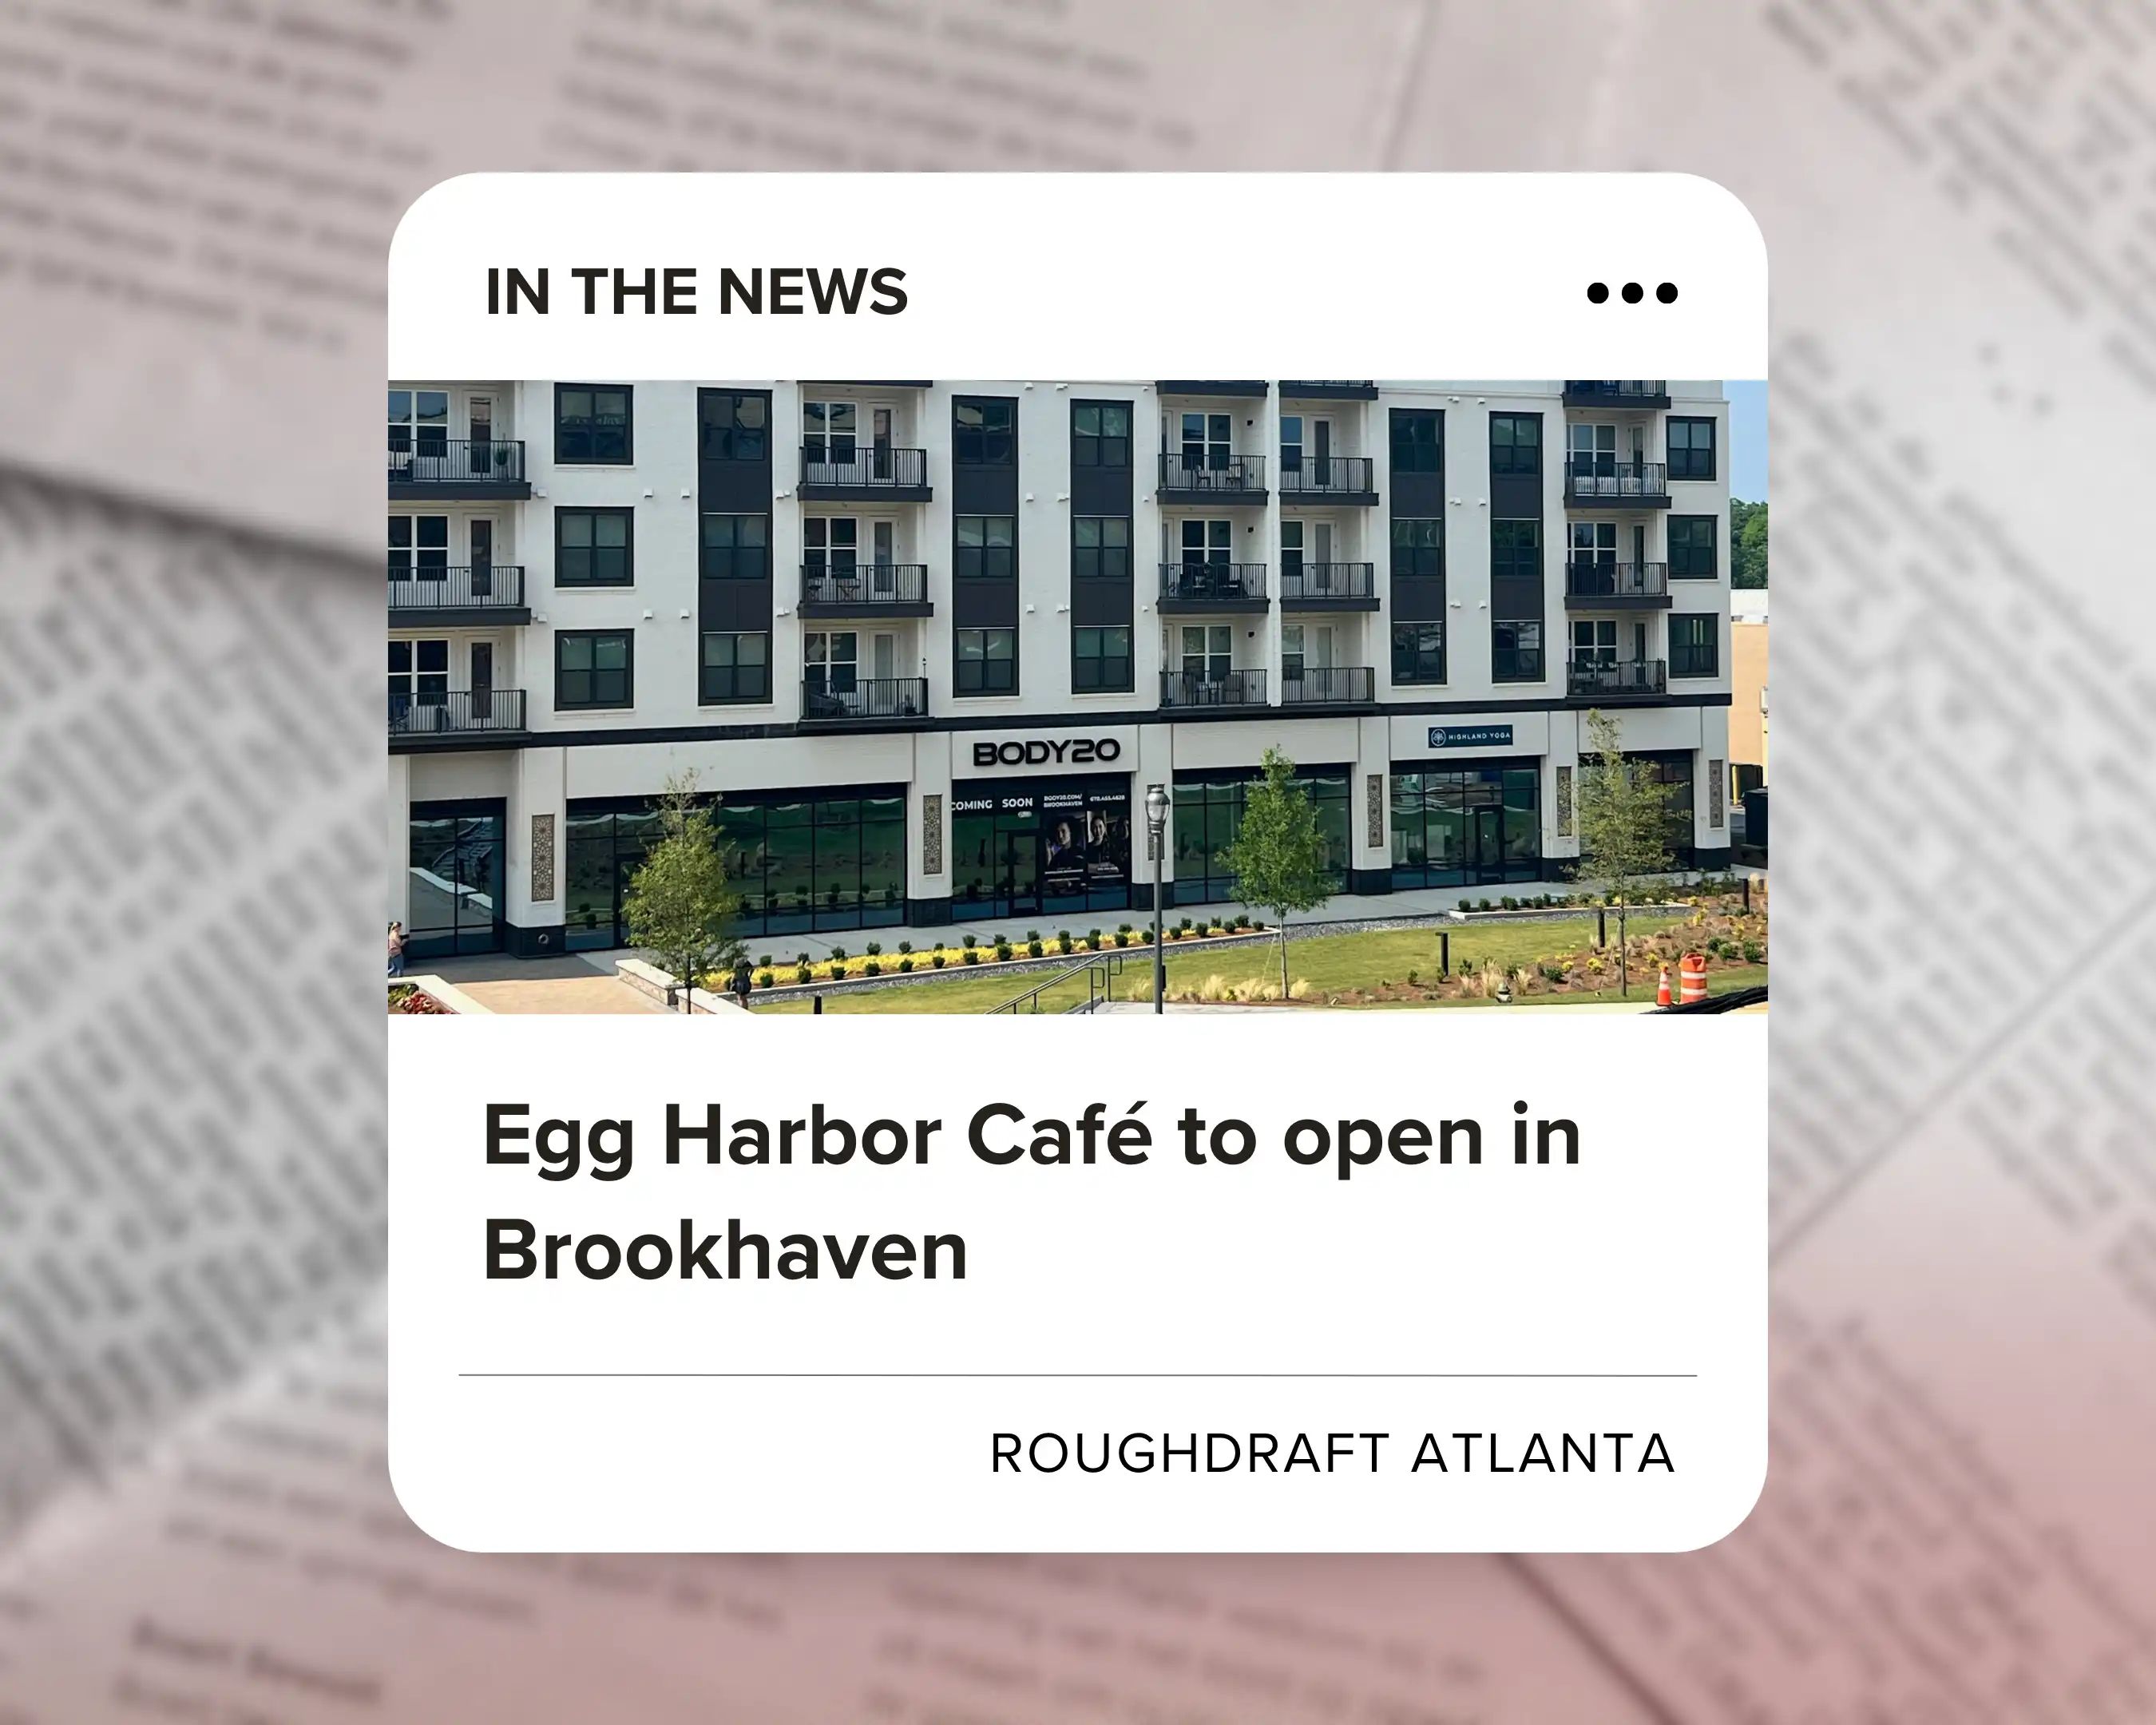 Egg Harbor Cafe to open in Brookhaven - Roughdraft Atlanta